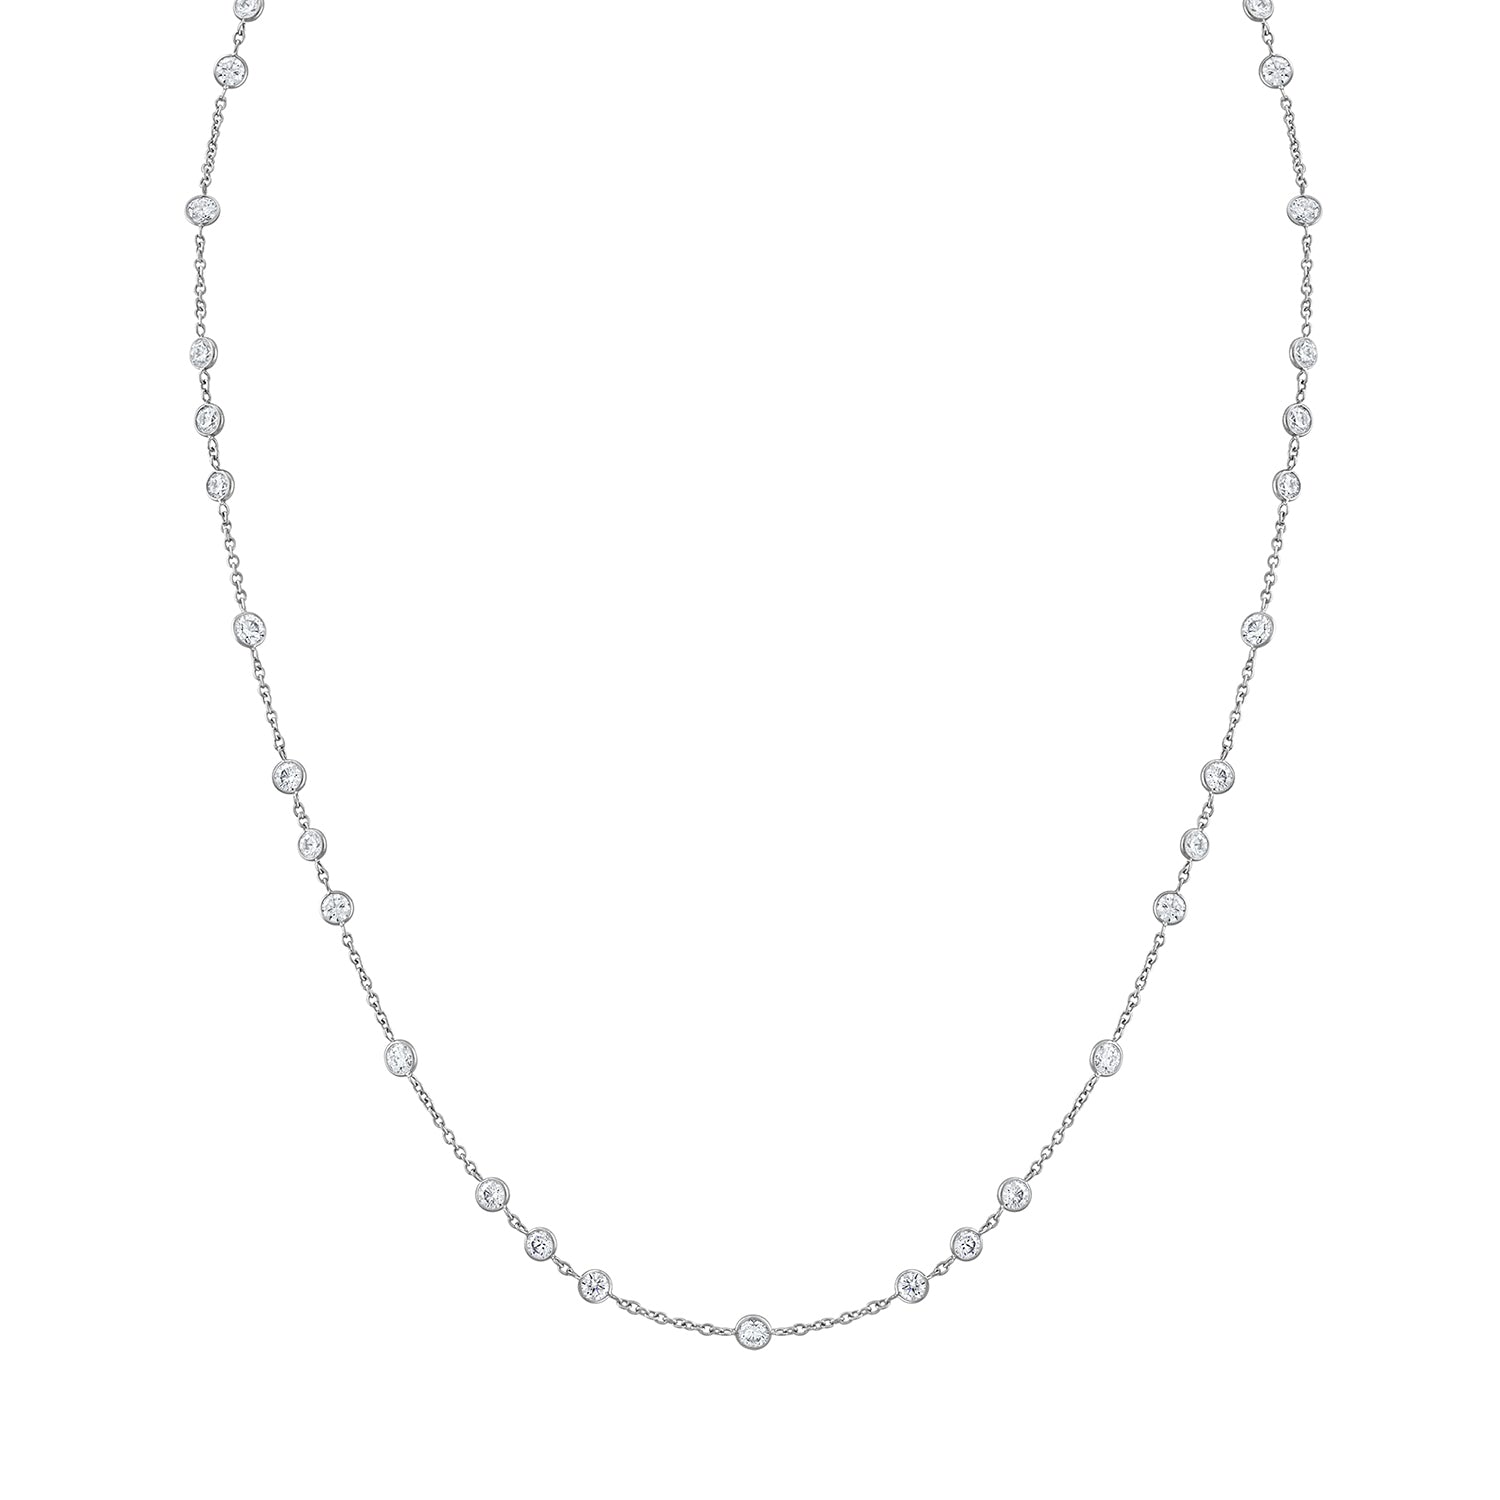 Stunning Diamonds by the Yard necklace featuring over five carats of top quality diamonds set in handmade platinum. Elegant design with versatile diamond spacing for all-day wear.